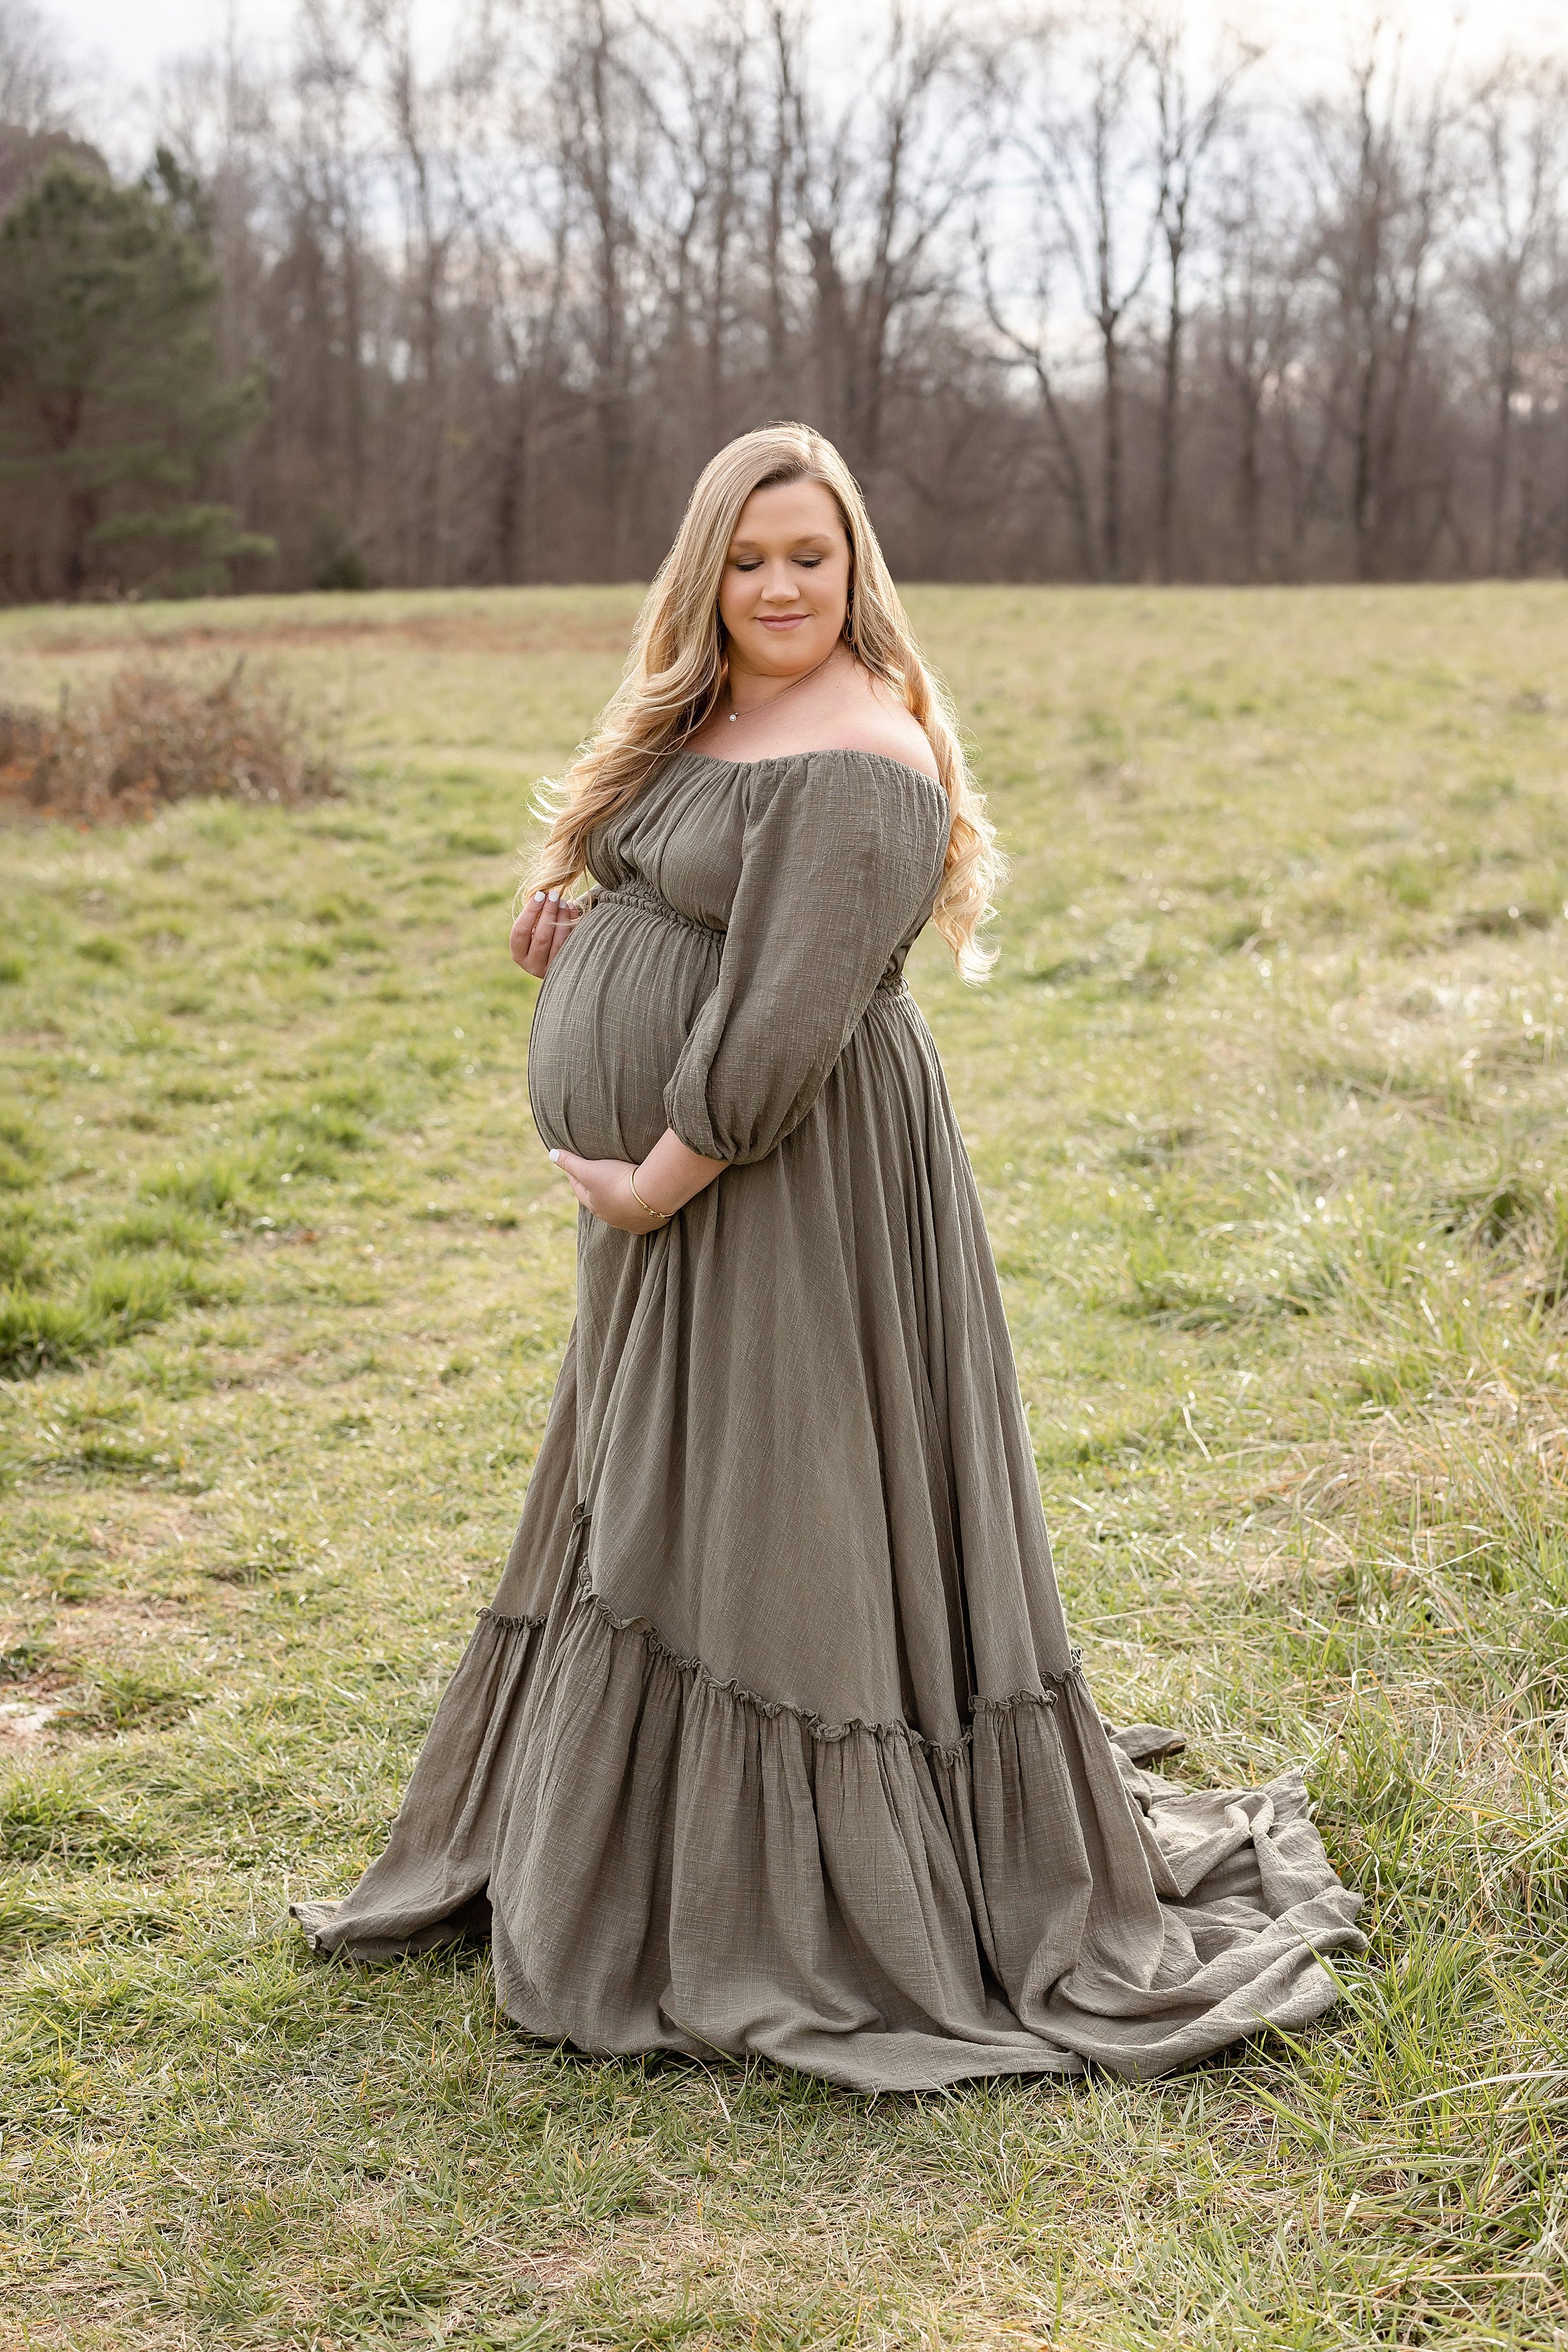  Maternity portrait of a pregnant mother with a peasant off-the-shoulders linen gown standing in an Atlanta field looking over her left shoulder as she plays with her hair with her right hand and frames her belly with her left taken during the fall s